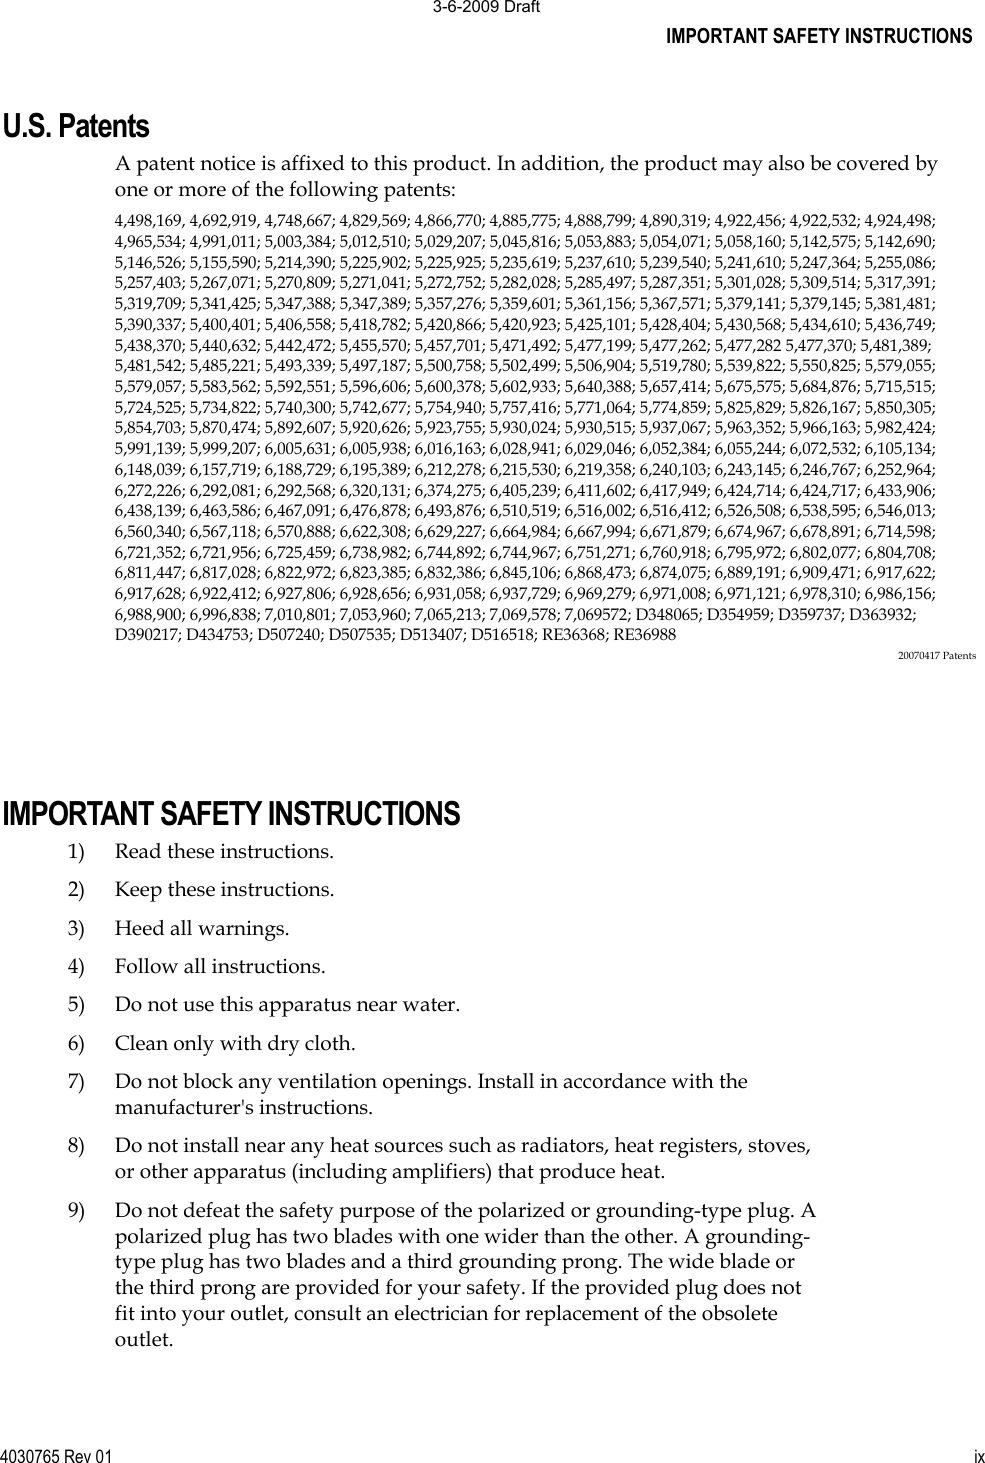 IMPORTANT SAFETY INSTRUCTIONS 4030765 Rev 01 ixU.S. Patents A patent notice is affixed to this product. In addition, the product may also be covered by one or more of the following patents: 4,498,169, 4,692,919, 4,748,667; 4,829,569; 4,866,770; 4,885,775; 4,888,799; 4,890,319; 4,922,456; 4,922,532; 4,924,498;4,965,534; 4,991,011; 5,003,384; 5,012,510; 5,029,207; 5,045,816; 5,053,883; 5,054,071; 5,058,160; 5,142,575; 5,142,690;5,146,526; 5,155,590; 5,214,390; 5,225,902; 5,225,925; 5,235,619; 5,237,610; 5,239,540; 5,241,610; 5,247,364; 5,255,086;5,257,403; 5,267,071; 5,270,809; 5,271,041; 5,272,752; 5,282,028; 5,285,497; 5,287,351; 5,301,028; 5,309,514; 5,317,391;5,319,709; 5,341,425; 5,347,388; 5,347,389; 5,357,276; 5,359,601; 5,361,156; 5,367,571; 5,379,141; 5,379,145; 5,381,481;5,390,337; 5,400,401; 5,406,558; 5,418,782; 5,420,866; 5,420,923; 5,425,101; 5,428,404; 5,430,568; 5,434,610; 5,436,749;5,438,370; 5,440,632; 5,442,472; 5,455,570; 5,457,701; 5,471,492; 5,477,199; 5,477,262; 5,477,282 5,477,370; 5,481,389;5,481,542; 5,485,221; 5,493,339; 5,497,187; 5,500,758; 5,502,499; 5,506,904; 5,519,780; 5,539,822; 5,550,825; 5,579,055;5,579,057; 5,583,562; 5,592,551; 5,596,606; 5,600,378; 5,602,933; 5,640,388; 5,657,414; 5,675,575; 5,684,876; 5,715,515;5,724,525; 5,734,822; 5,740,300; 5,742,677; 5,754,940; 5,757,416; 5,771,064; 5,774,859; 5,825,829; 5,826,167; 5,850,305;5,854,703; 5,870,474; 5,892,607; 5,920,626; 5,923,755; 5,930,024; 5,930,515; 5,937,067; 5,963,352; 5,966,163; 5,982,424;5,991,139; 5,999,207; 6,005,631; 6,005,938; 6,016,163; 6,028,941; 6,029,046; 6,052,384; 6,055,244; 6,072,532; 6,105,134;6,148,039; 6,157,719; 6,188,729; 6,195,389; 6,212,278; 6,215,530; 6,219,358; 6,240,103; 6,243,145; 6,246,767; 6,252,964;6,272,226; 6,292,081; 6,292,568; 6,320,131; 6,374,275; 6,405,239; 6,411,602; 6,417,949; 6,424,714; 6,424,717; 6,433,906;6,438,139; 6,463,586; 6,467,091; 6,476,878; 6,493,876; 6,510,519; 6,516,002; 6,516,412; 6,526,508; 6,538,595; 6,546,013;6,560,340; 6,567,118; 6,570,888; 6,622,308; 6,629,227; 6,664,984; 6,667,994; 6,671,879; 6,674,967; 6,678,891; 6,714,598;6,721,352; 6,721,956; 6,725,459; 6,738,982; 6,744,892; 6,744,967; 6,751,271; 6,760,918; 6,795,972; 6,802,077; 6,804,708;6,811,447; 6,817,028; 6,822,972; 6,823,385; 6,832,386; 6,845,106; 6,868,473; 6,874,075; 6,889,191; 6,909,471; 6,917,622;6,917,628; 6,922,412; 6,927,806; 6,928,656; 6,931,058; 6,937,729; 6,969,279; 6,971,008; 6,971,121; 6,978,310; 6,986,156;6,988,900; 6,996,838; 7,010,801; 7,053,960; 7,065,213; 7,069,578; 7,069572; D348065; D354959; D359737; D363932;D390217; D434753; D507240; D507535; D513407; D516518; RE36368; RE36988 20070417 PatentsIMPORTANT SAFETY INSTRUCTIONS 1)  Read these instructions. 2) Keep these instructions. 3) Heed all warnings. 4)  Follow all instructions. 5) Do not use this apparatus near water. 6)  Clean only with dry cloth. 7)  Do not block any ventilation openings. Install in accordance with the manufacturer&apos;s instructions. 8)  Do not install near any heat sources such as radiators, heat registers, stoves, or other apparatus (including amplifiers) that produce heat. 9) Do not defeat the safety purpose of the polarized or grounding-type plug. A polarized plug has two blades with one wider than the other. A grounding-type plug has two blades and a third grounding prong. The wide blade or the third prong are provided for your safety. If the provided plug does not fit into your outlet, consult an electrician for replacement of the obsolete outlet. 3-6-2009 Draft